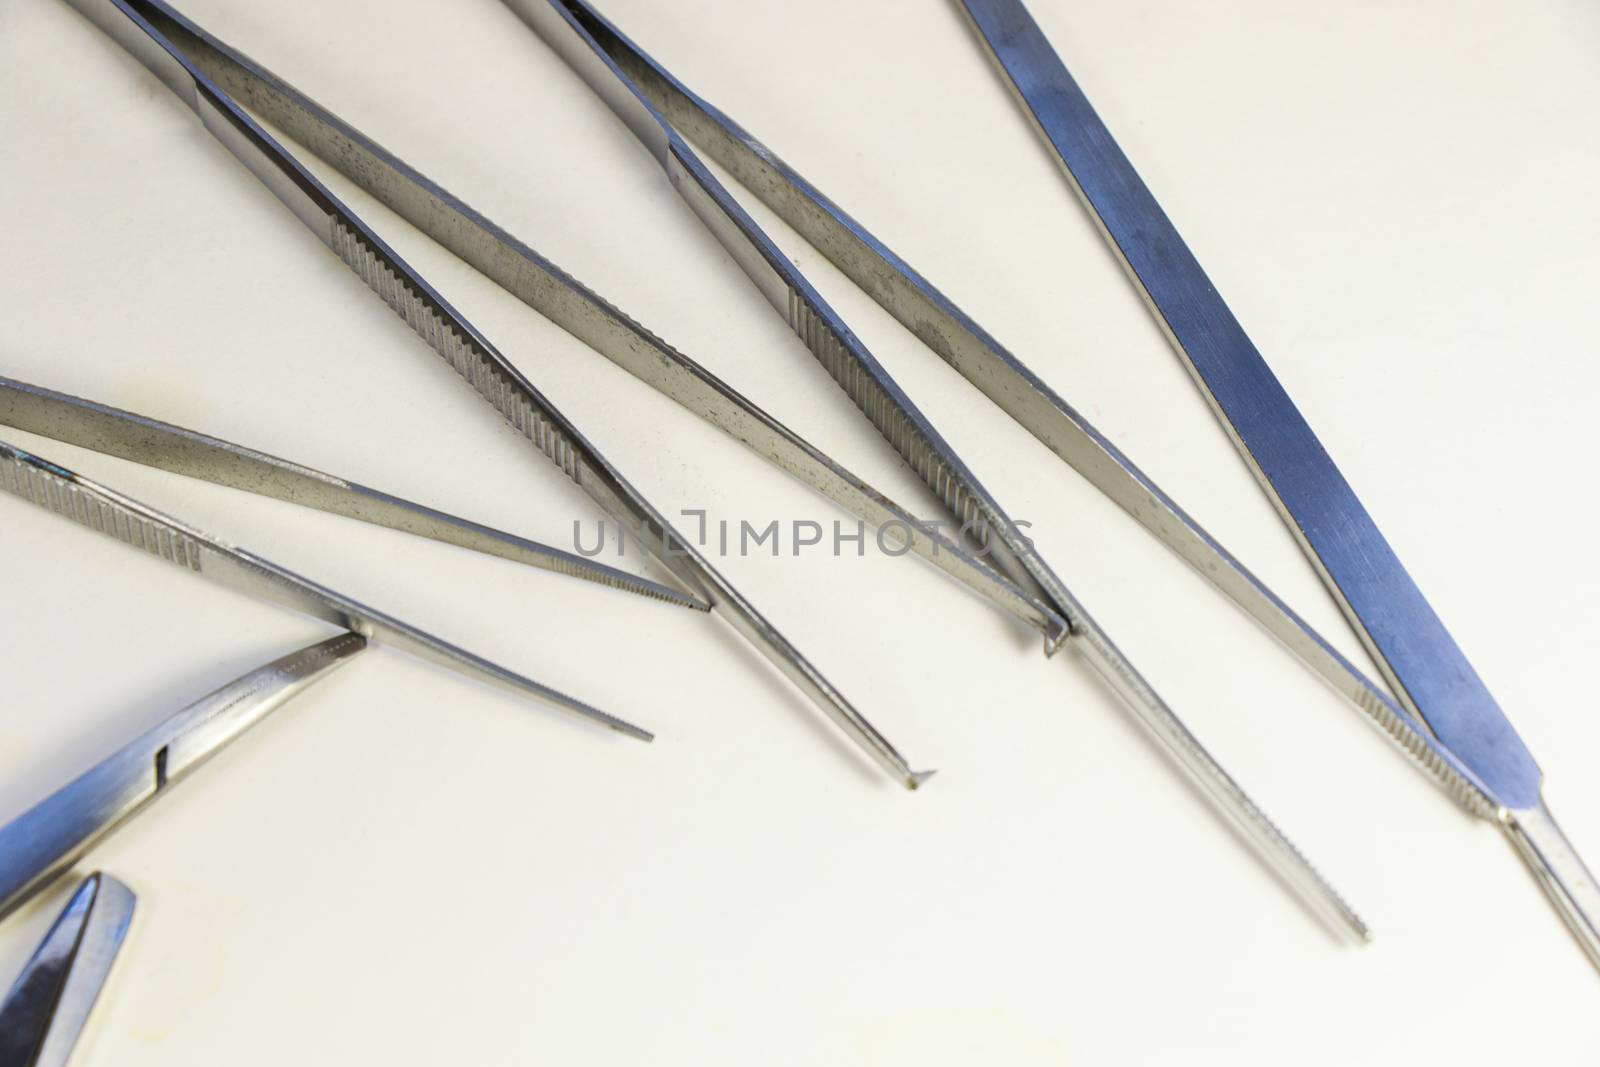 Dissection Kit - Premium Quality Stainless Steel Tools for Medical Students of Anatomy. Surgery instruments. Pincers. by Taidundua